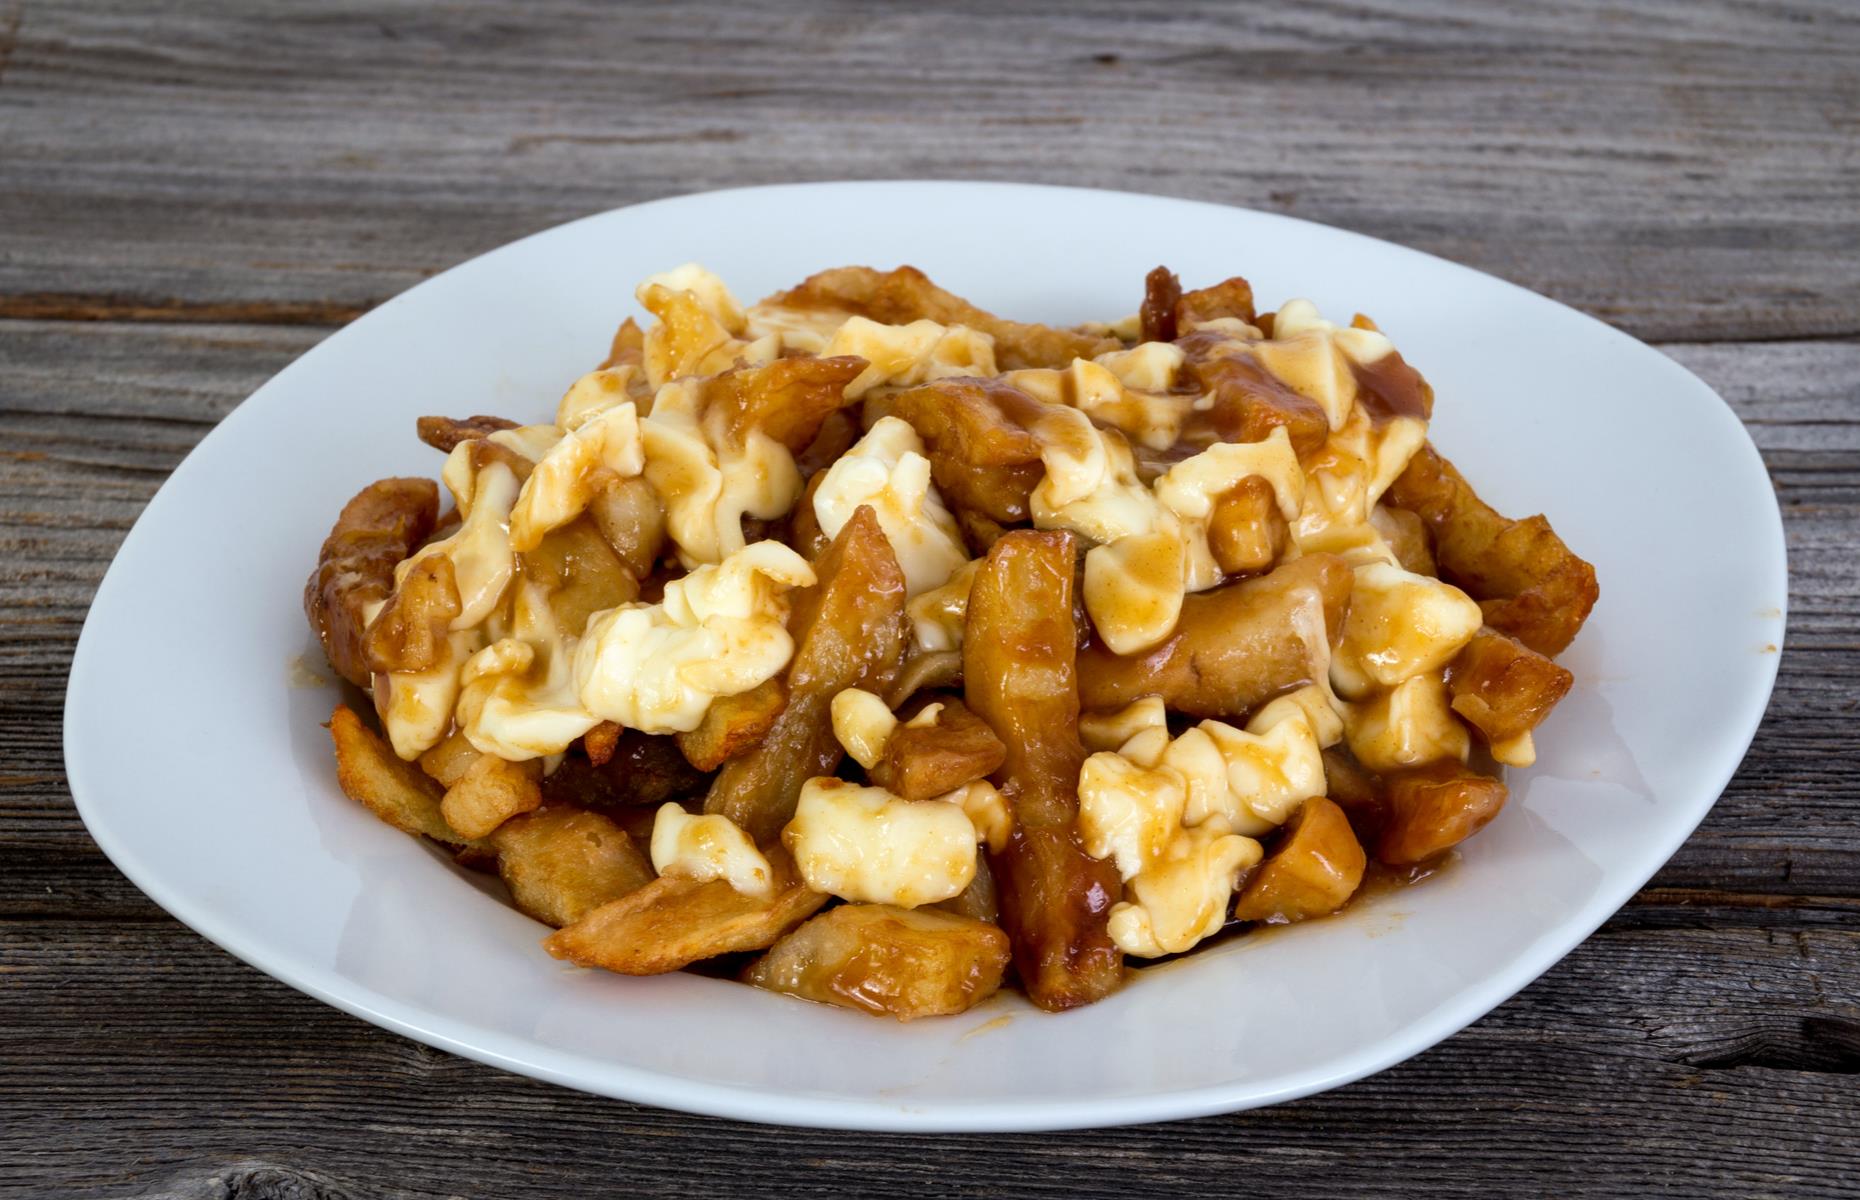 <p>Canadian staple poutine is a favourite of the Duchess of Sussex. Meghan discovered the comforting dish of fries topped with cheese curds and hot gravy while filming <em>Suits</em> in Toronto, according to <em>Delish</em>. "It's got to squeak when you bite into it... that's how you know you've got the right kind," she told the publication. </p>